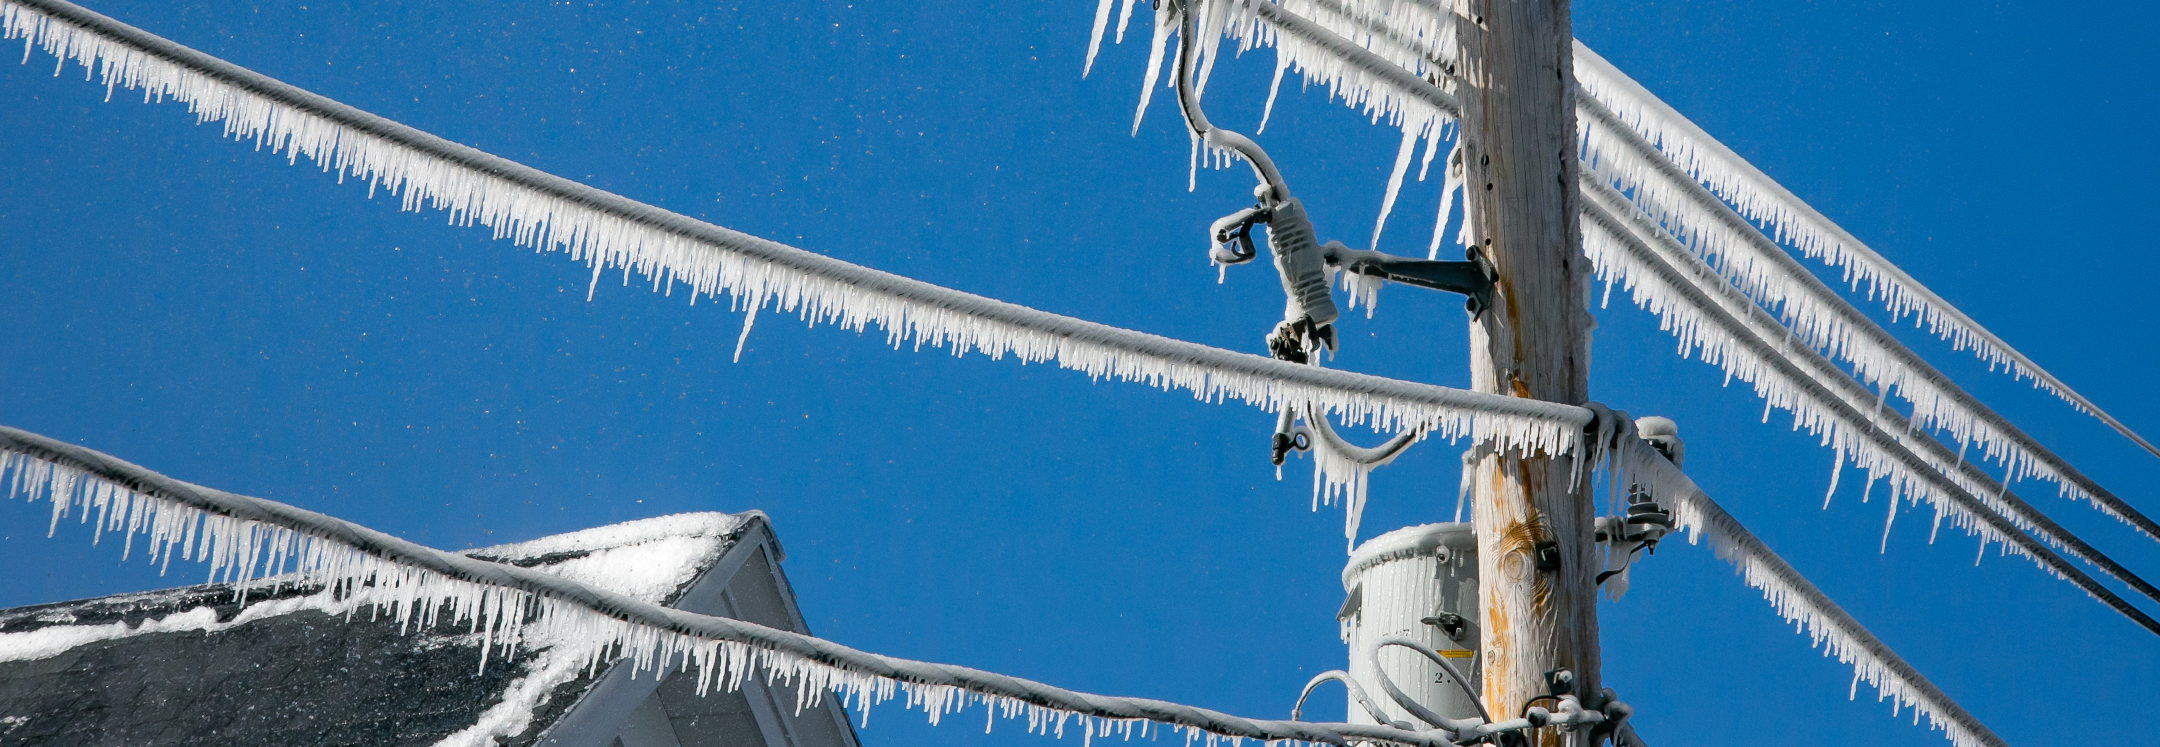 freezing rain causing power outages and frozen powerlines